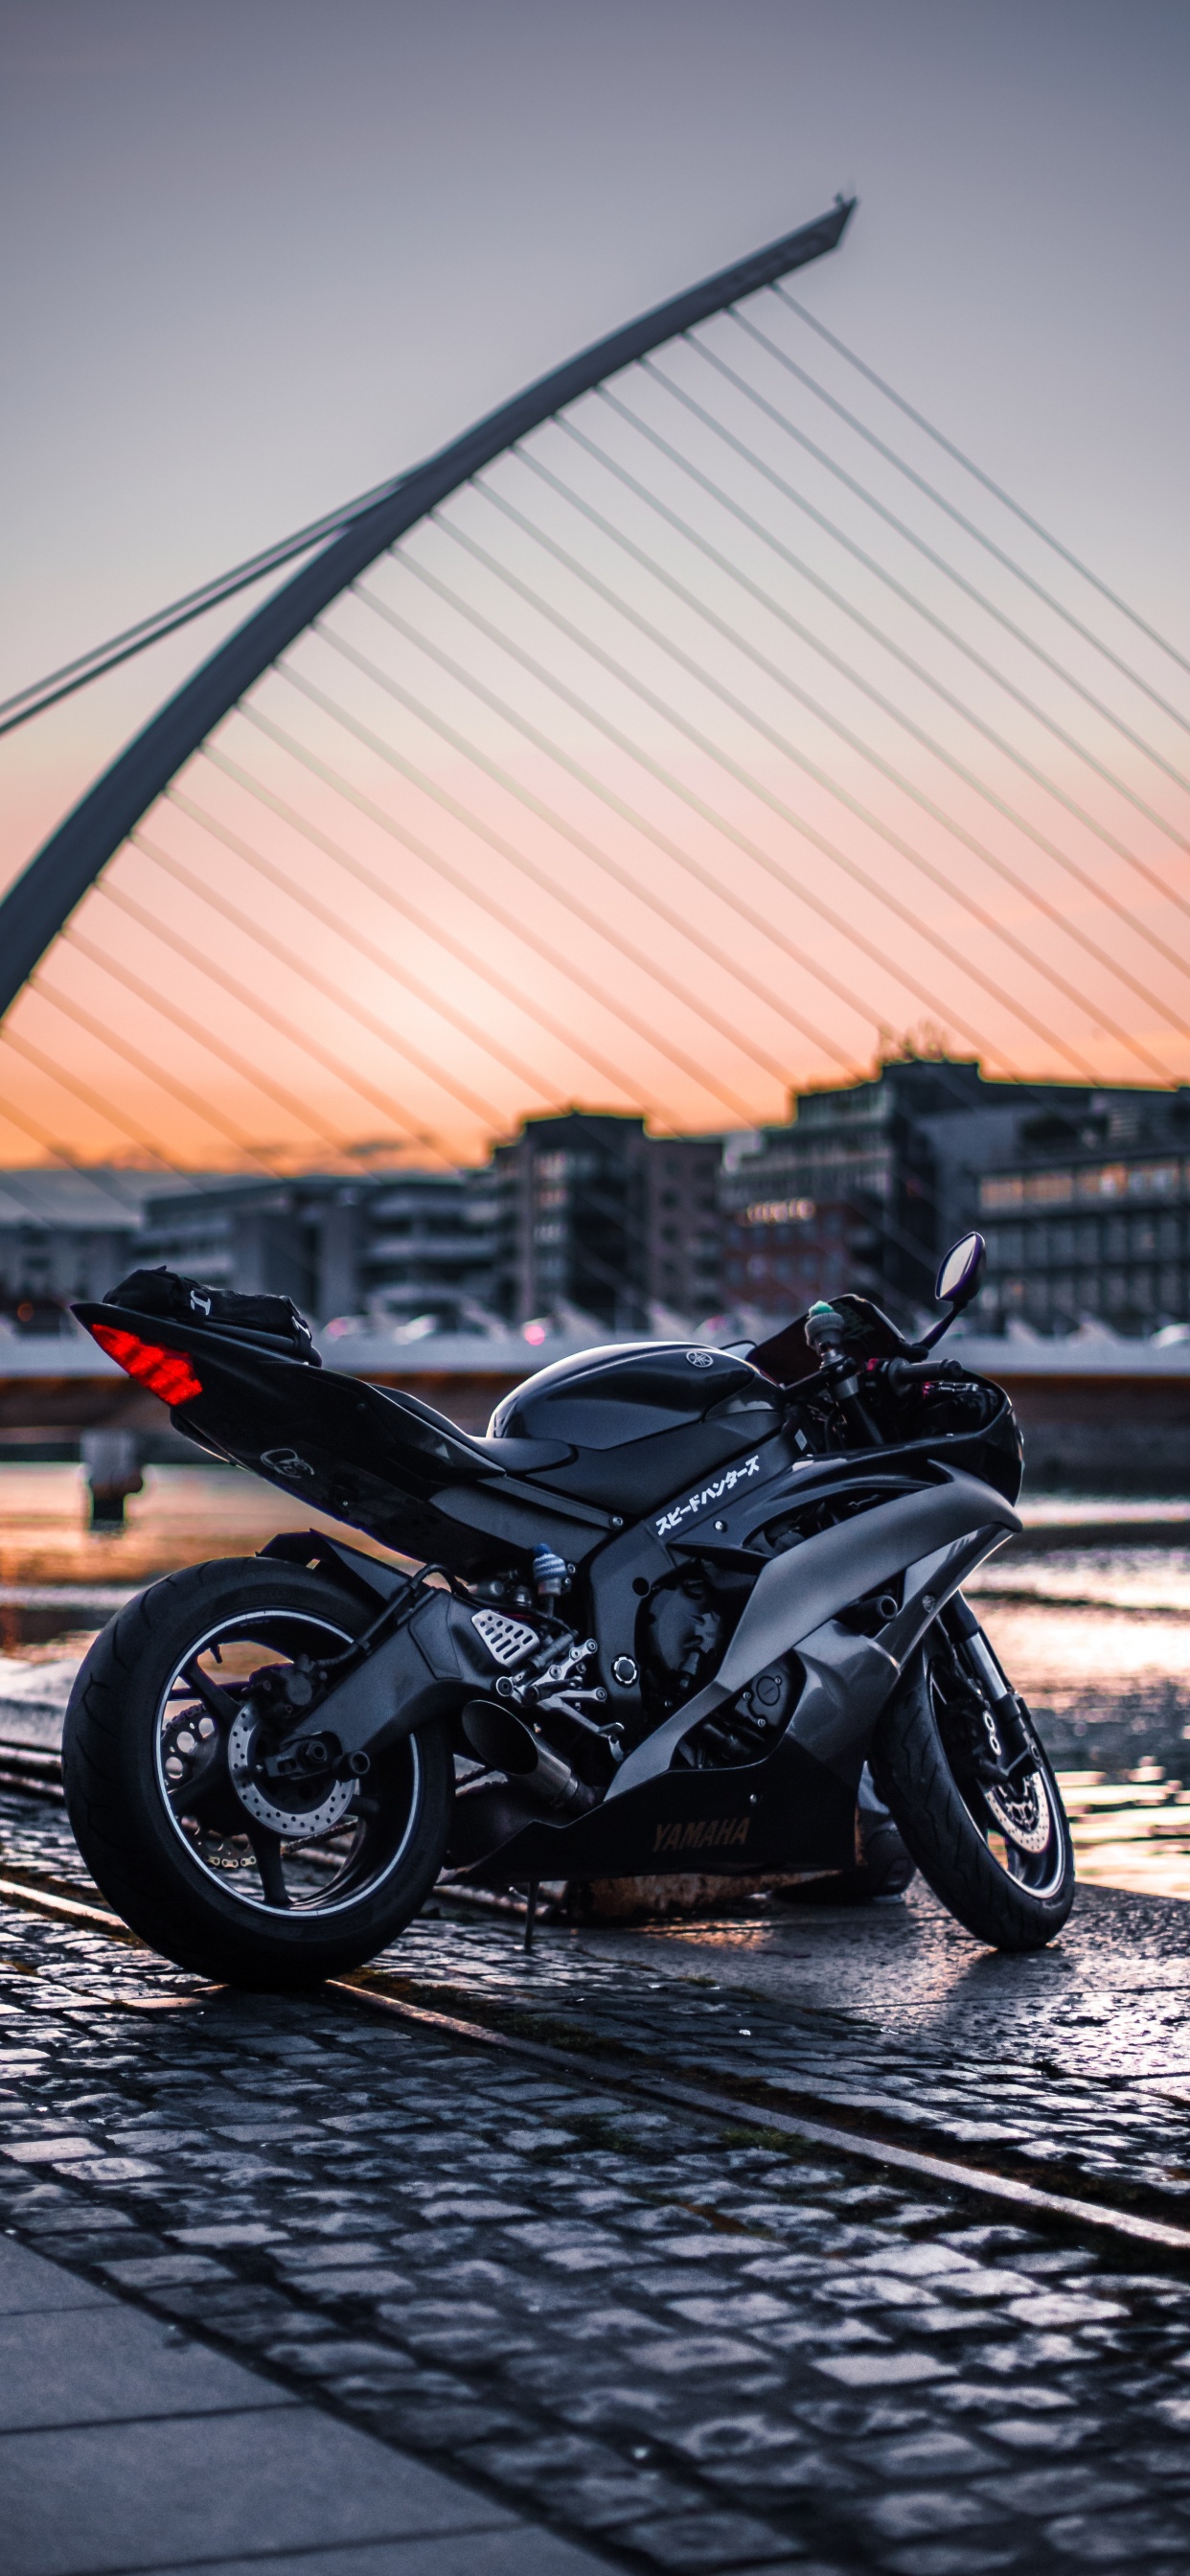 Black Sports Bike Parked on The Side of The Road. Wallpaper in 1242x2688 Resolution